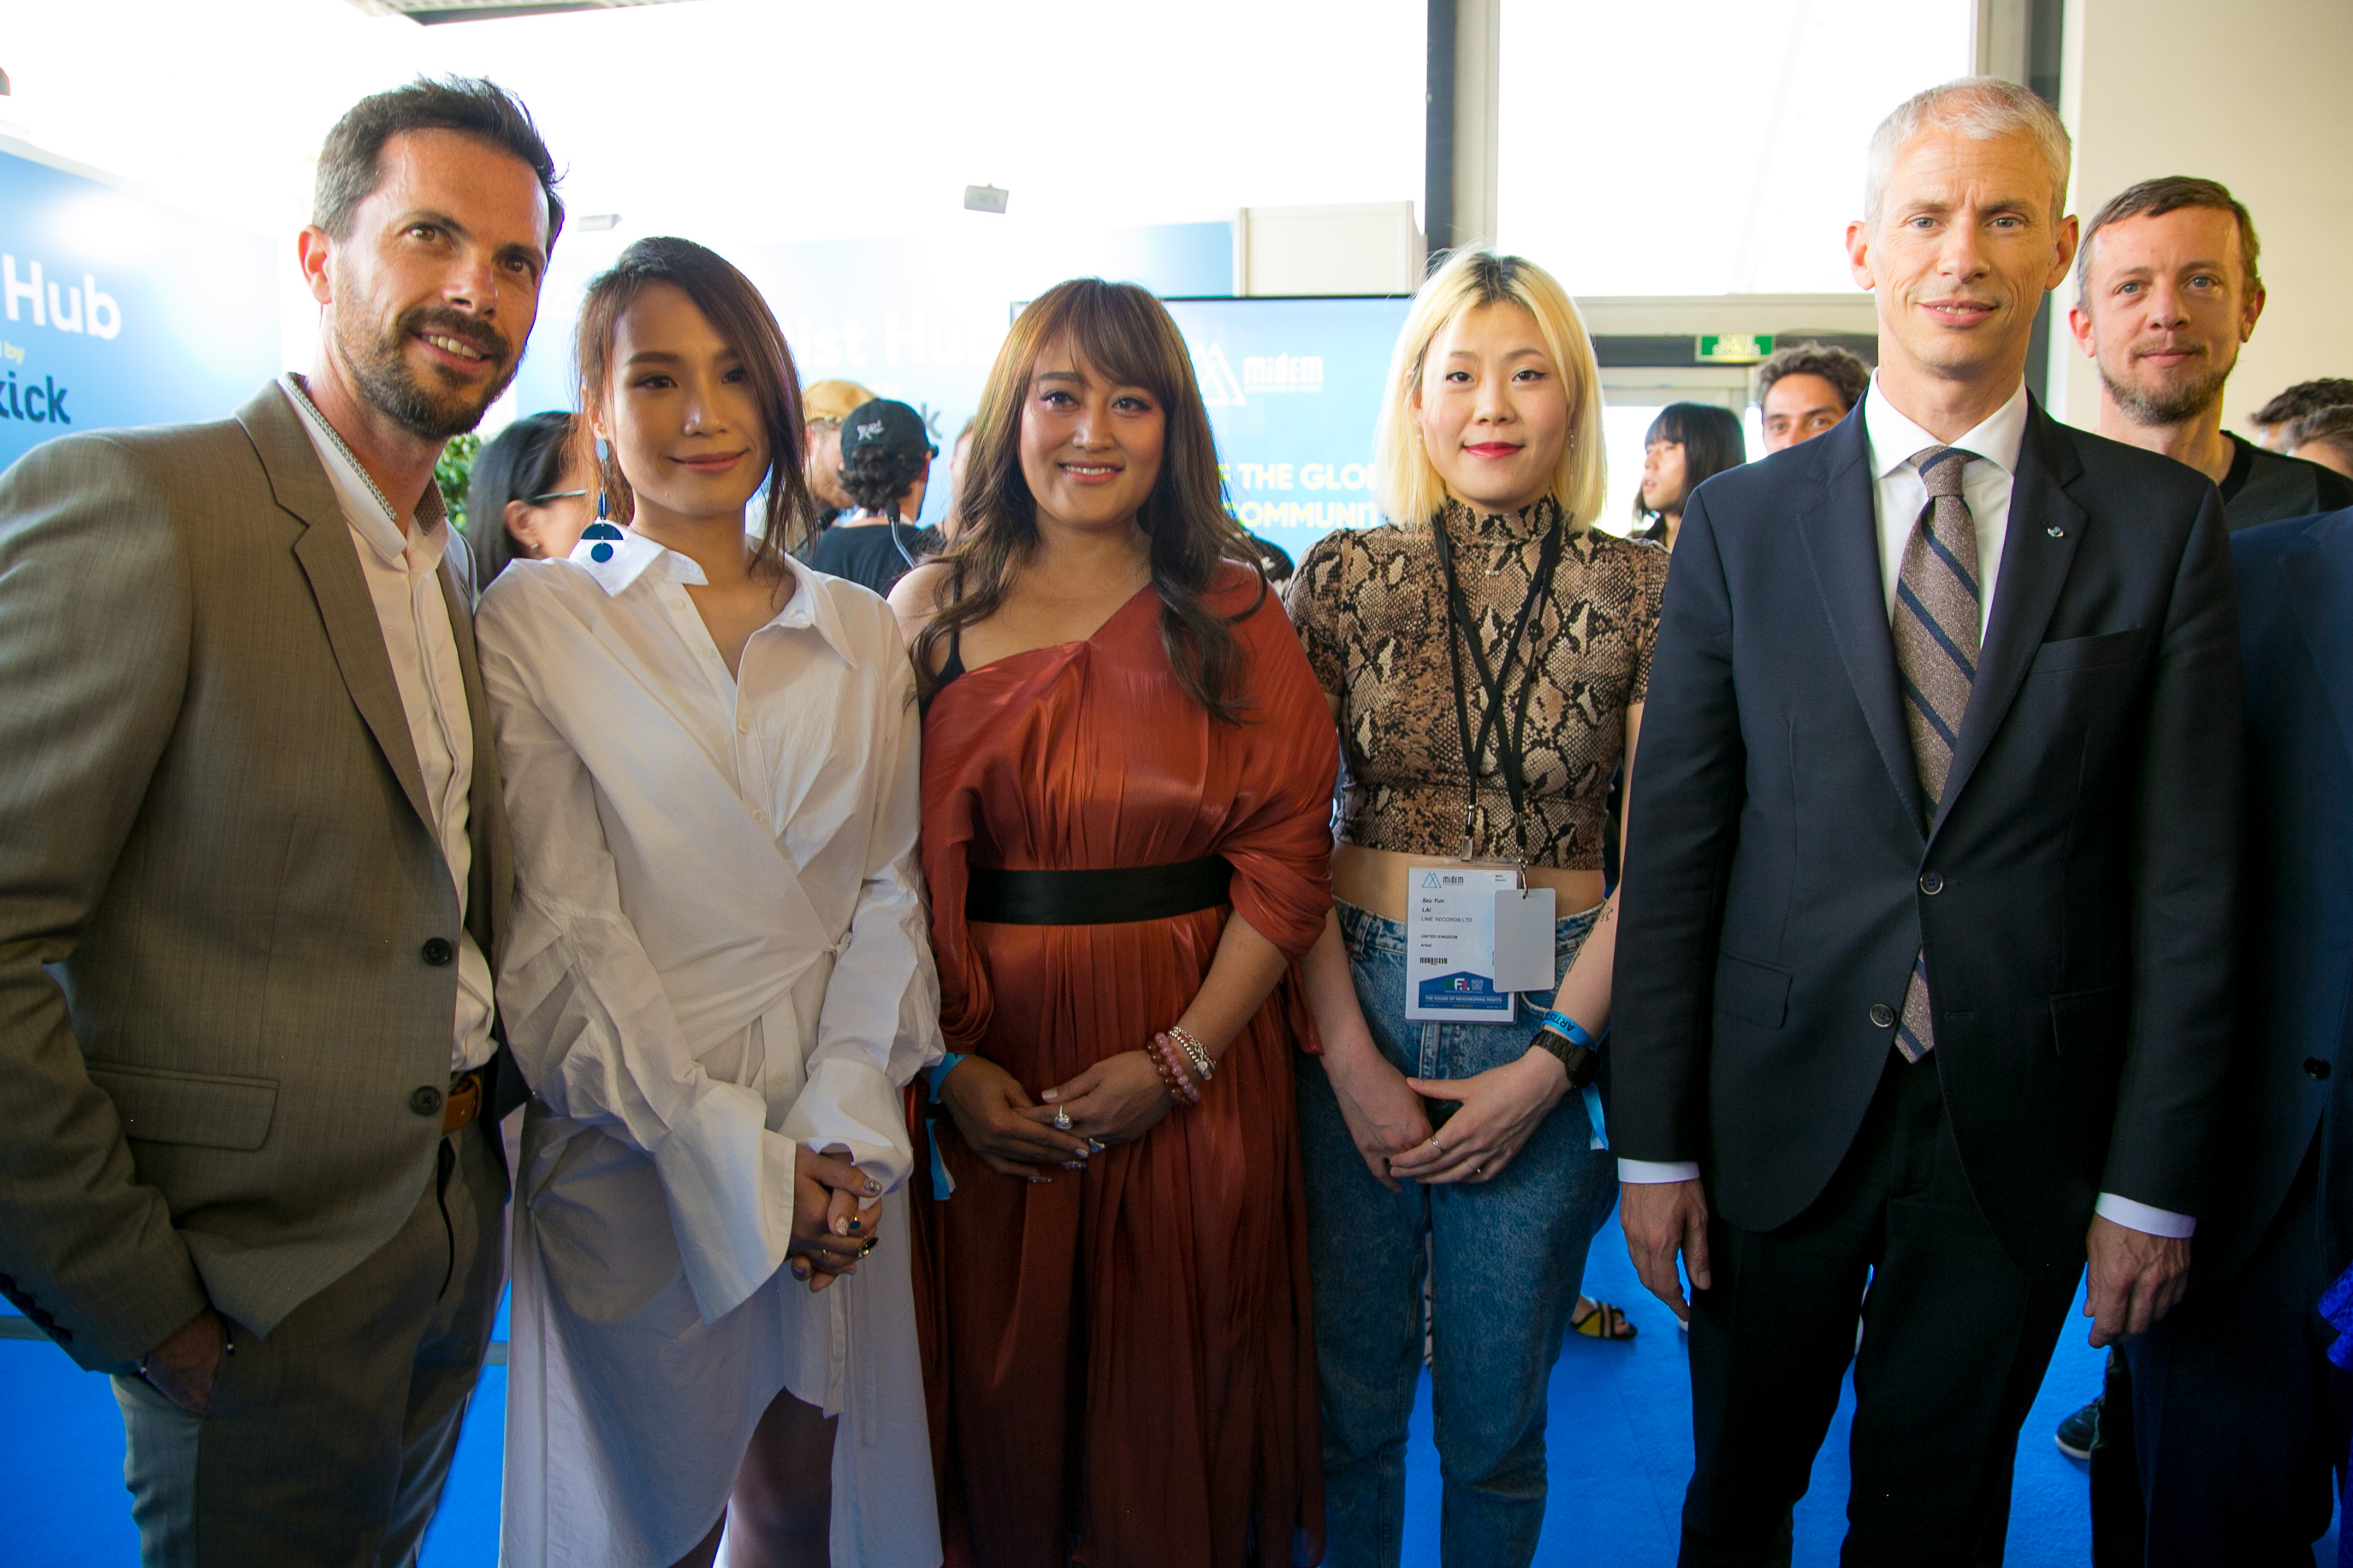 Taiwanese artists, trade delegation stir up MIDEM 2019 in Cannes